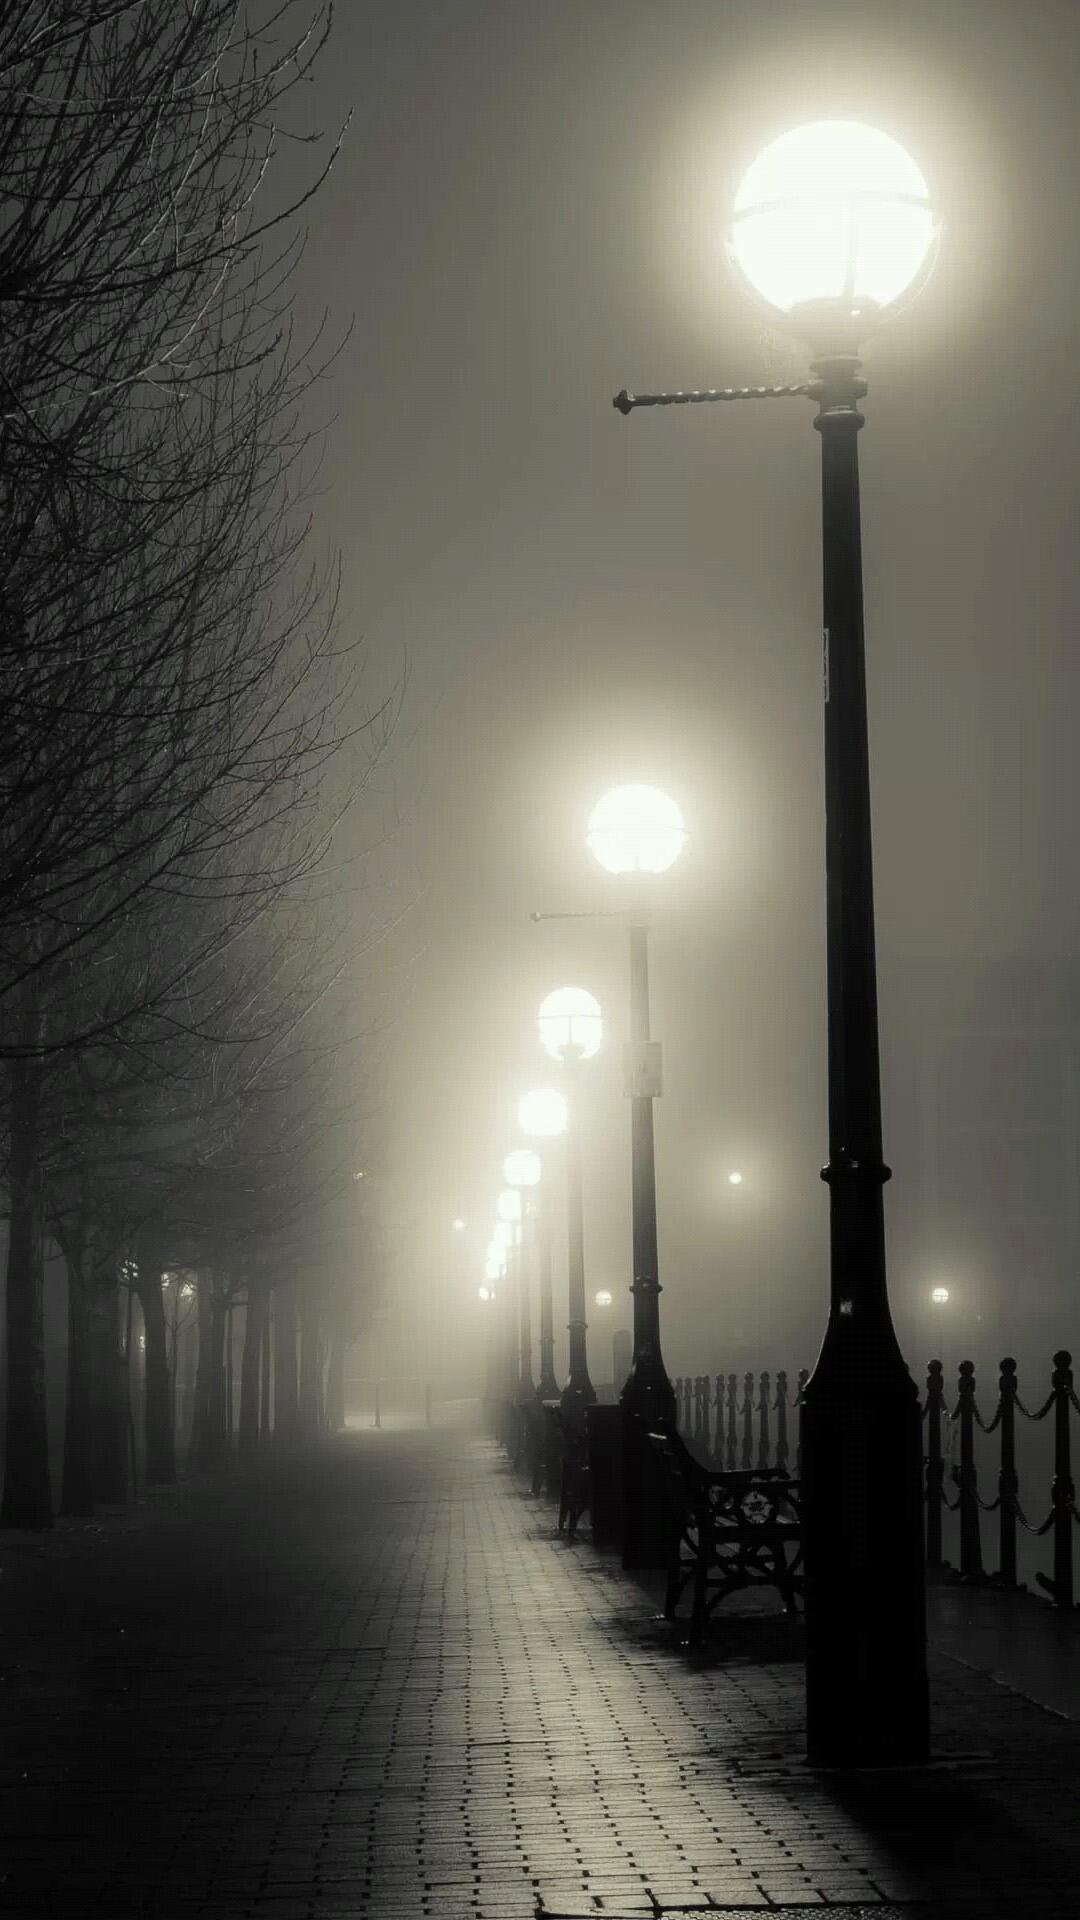 Foggy Street Lights Android Wallpaper free download